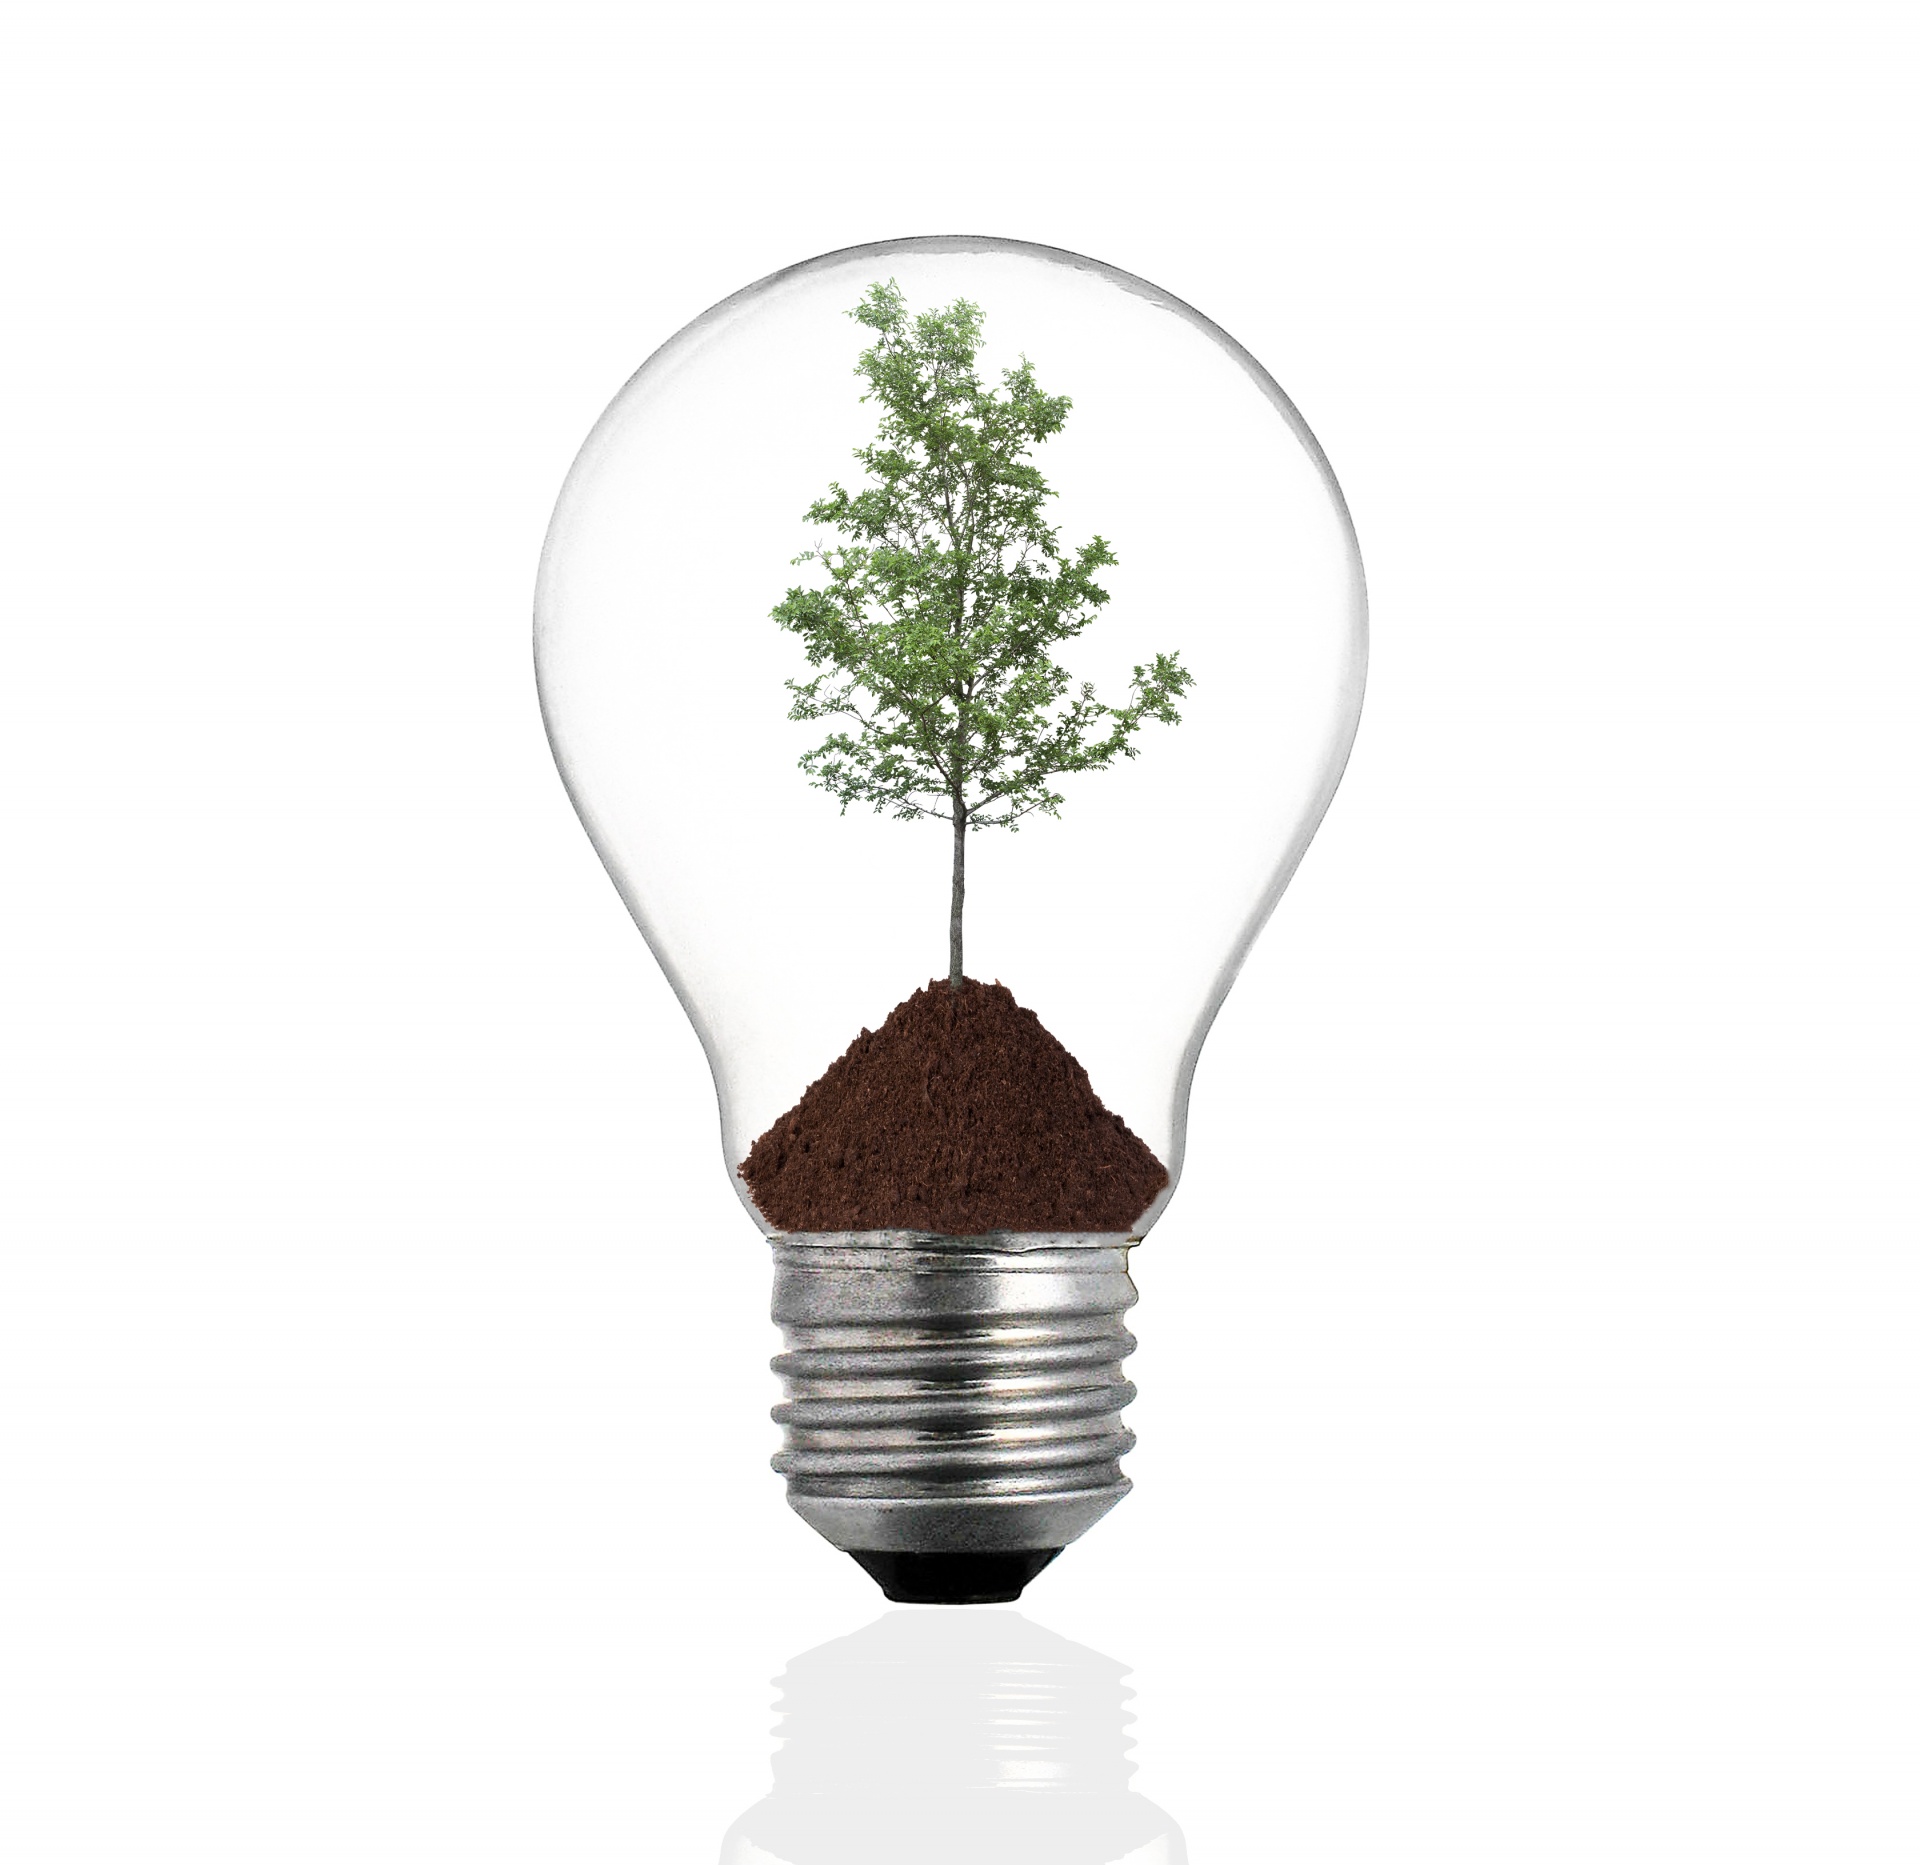 Bulb light with green tree inside isolated on white background